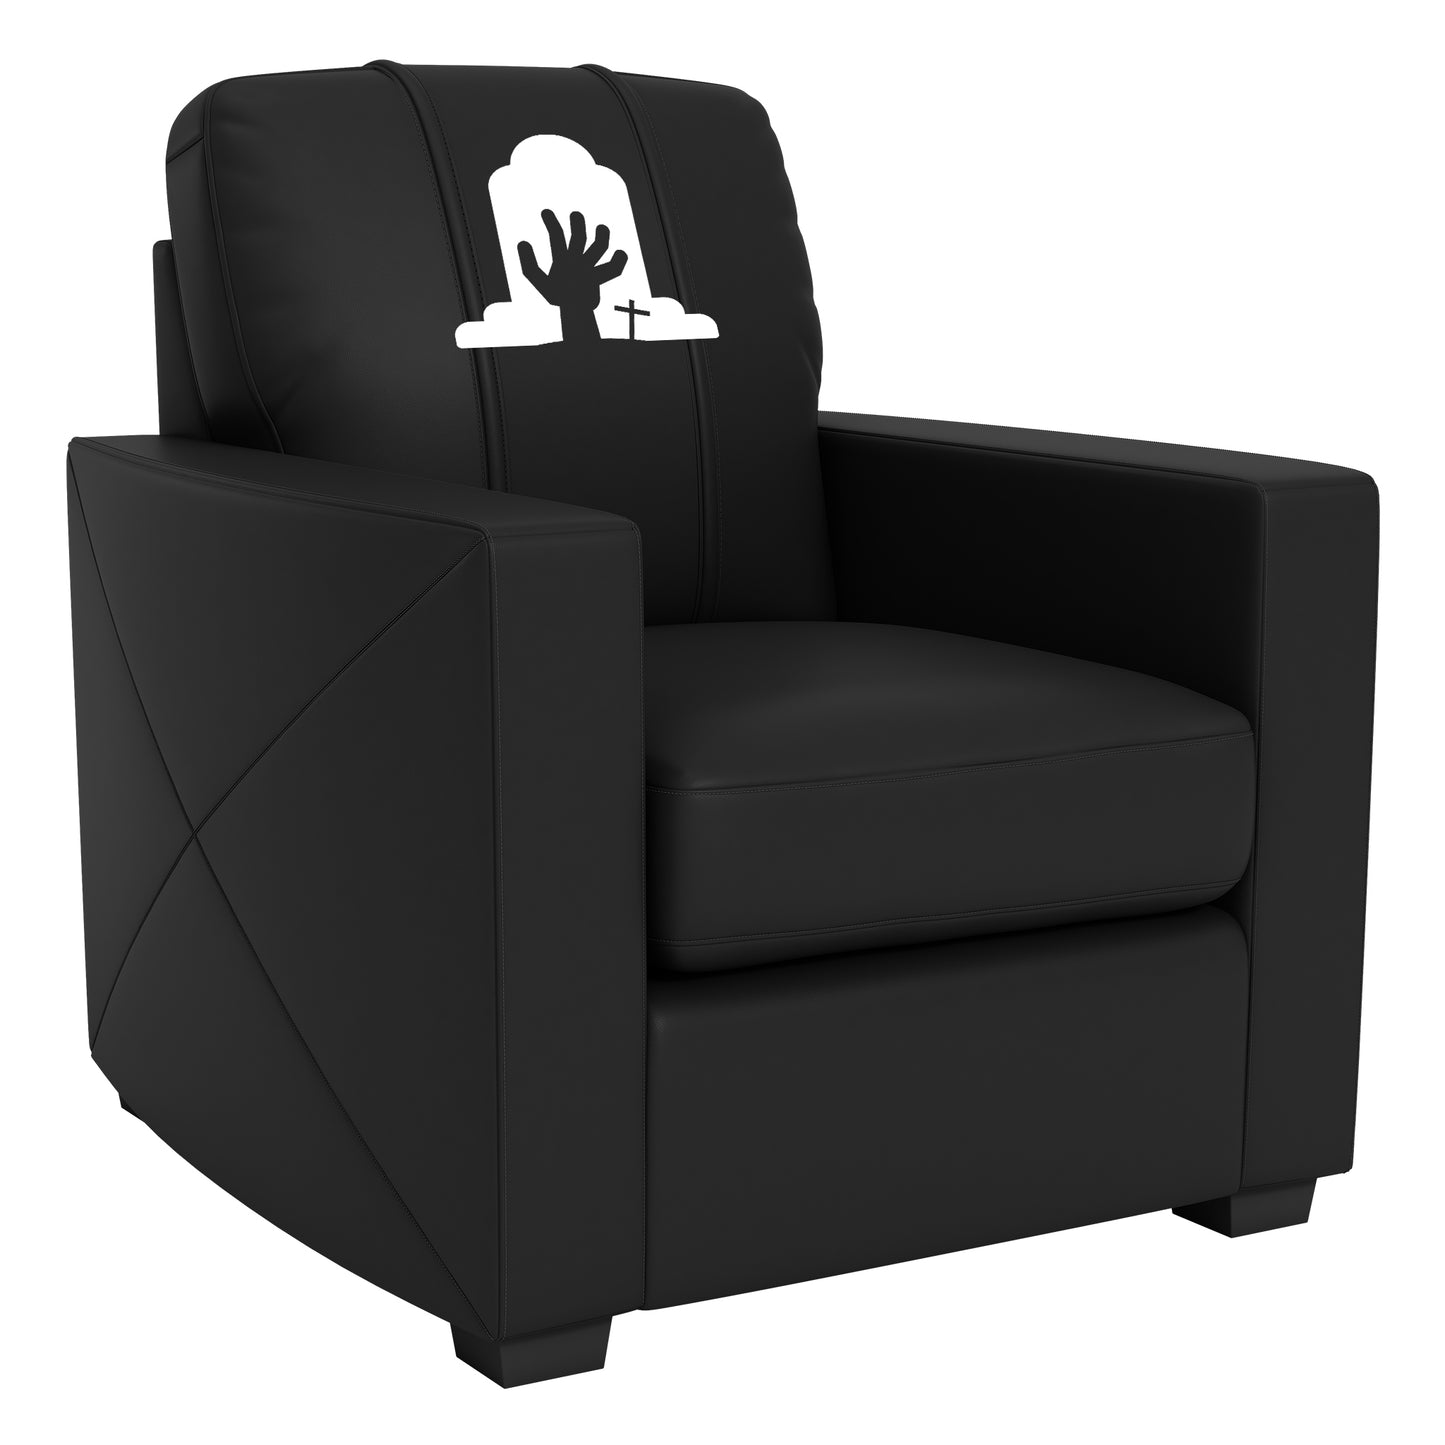 Silver Club Chair with Ghoulish Rising Hand Halloween Logo